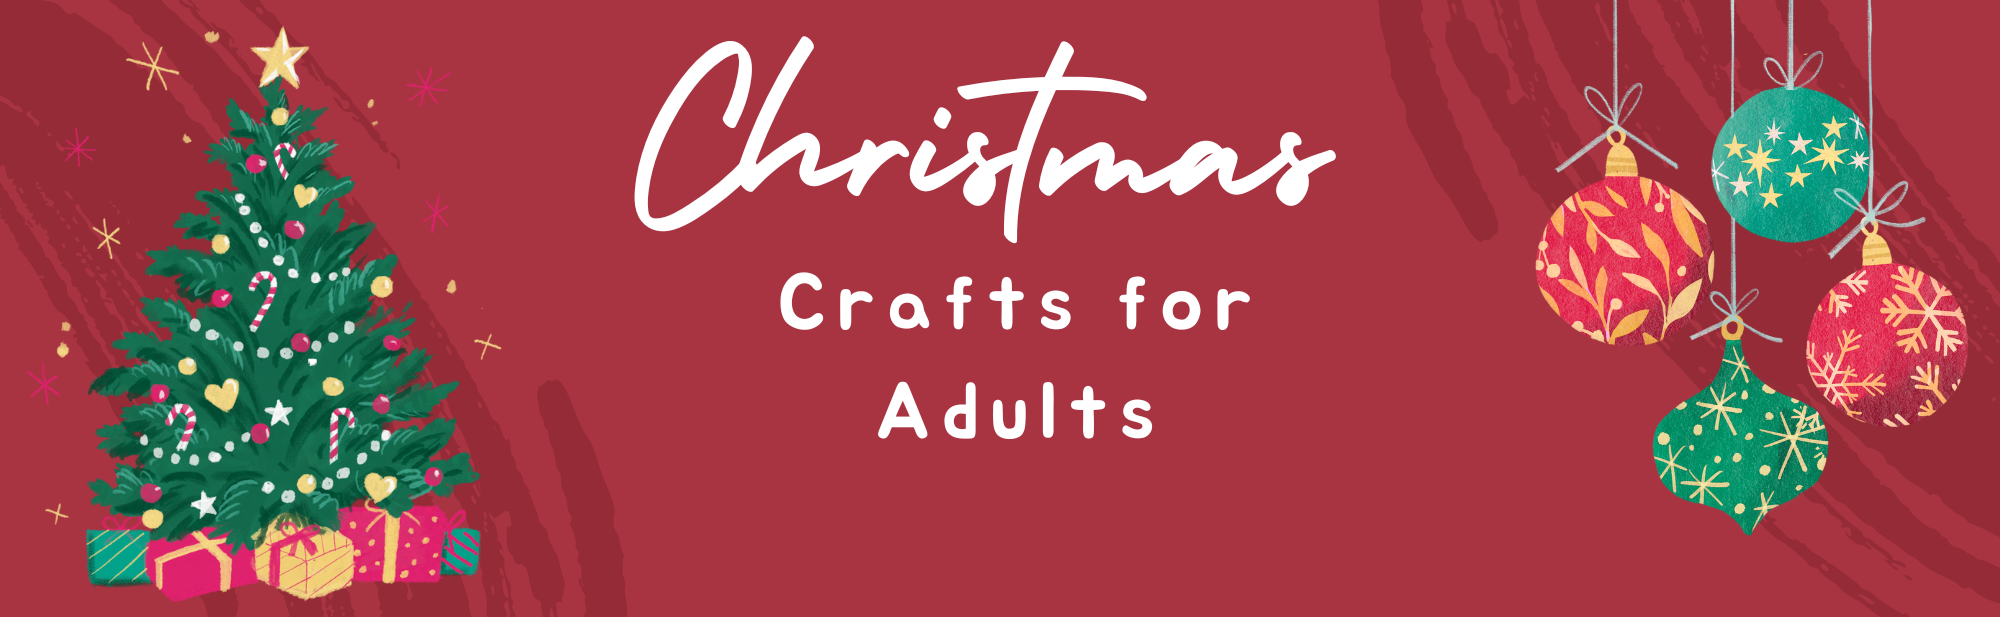 Christmas Crafts for Adults 